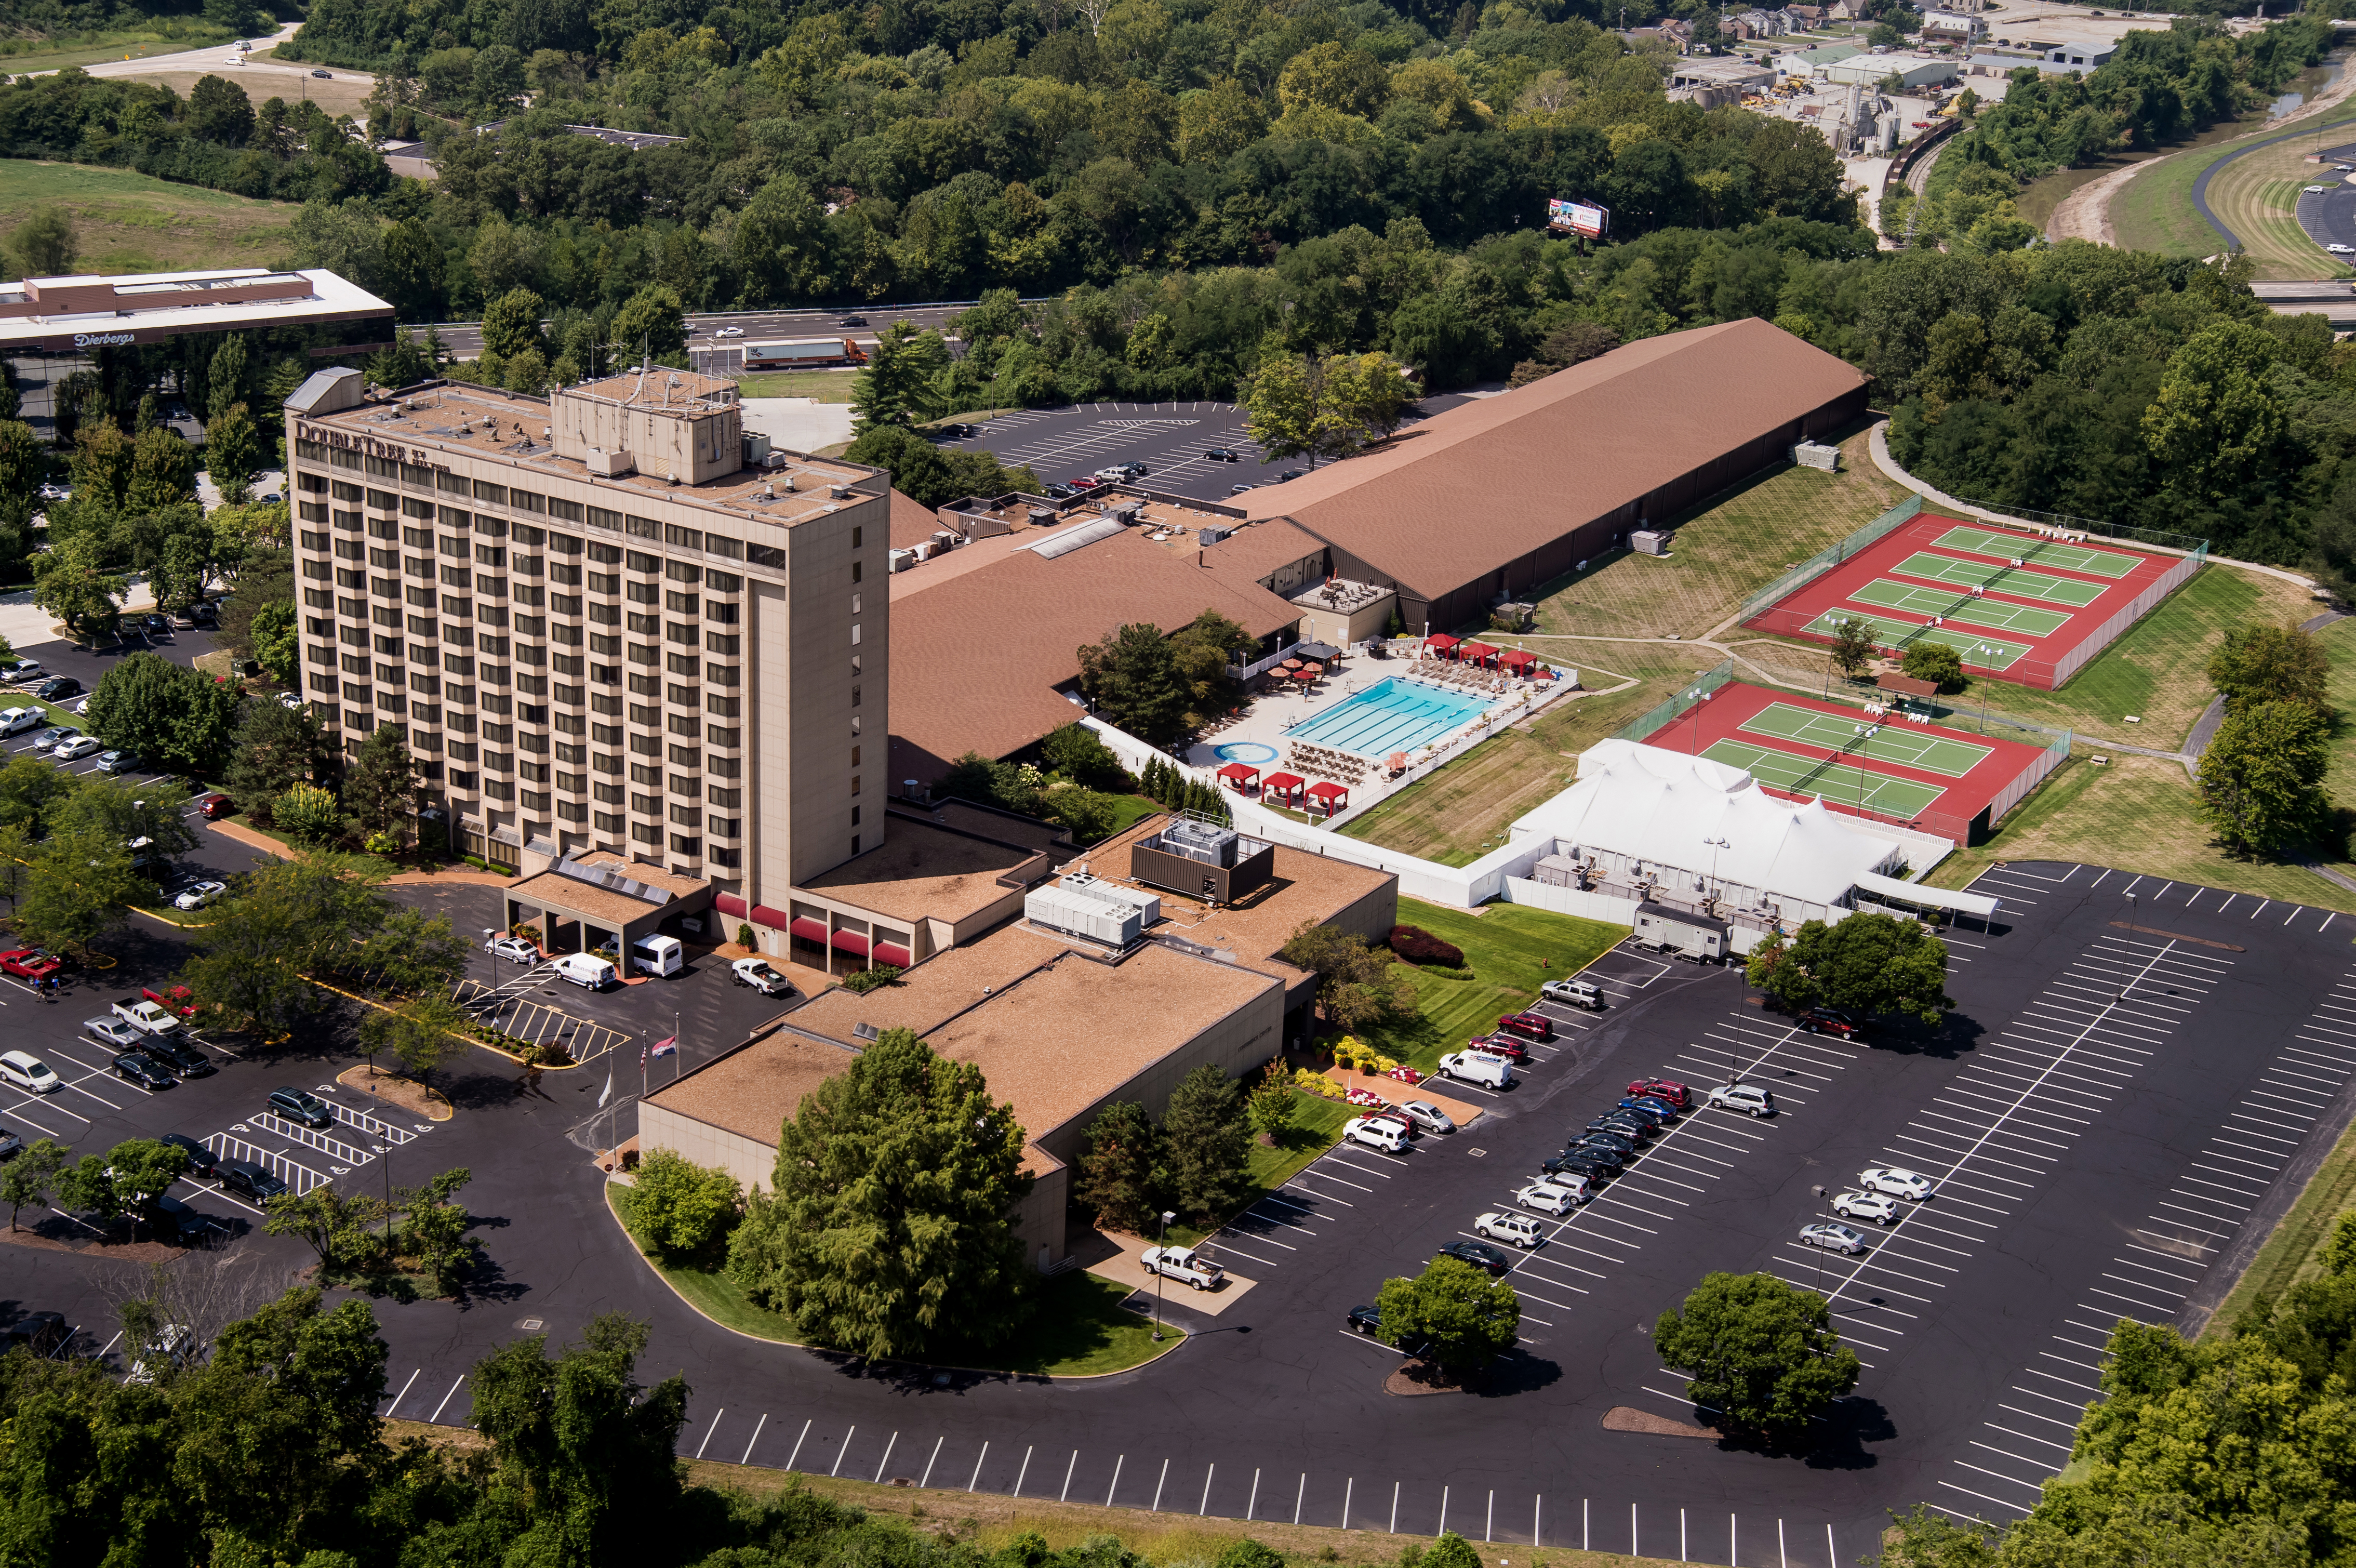 Overview of entire hotel property with athletic center, outdoor tennis courts, pool, and parking lot